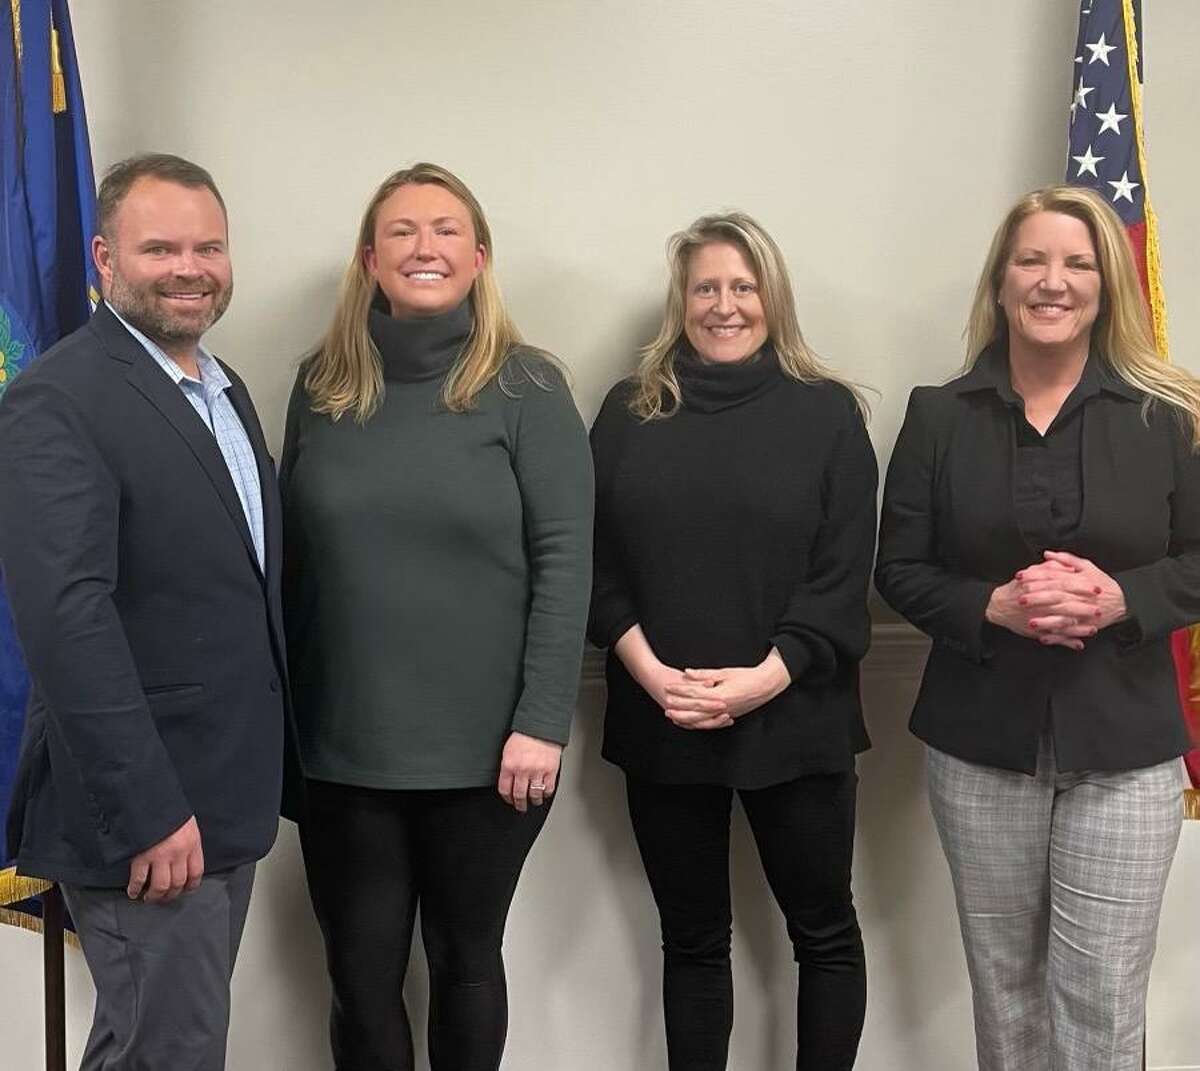 The Fairfield Republican Town Committee recently elected Sarah Matthews to be chairwoman, Chris Tymniak to be vice chairman, and Gwynne Magness Alperovich, to be secretary. They’re pictured here with Fairfield First Selectwoman Brenda Kupchick.